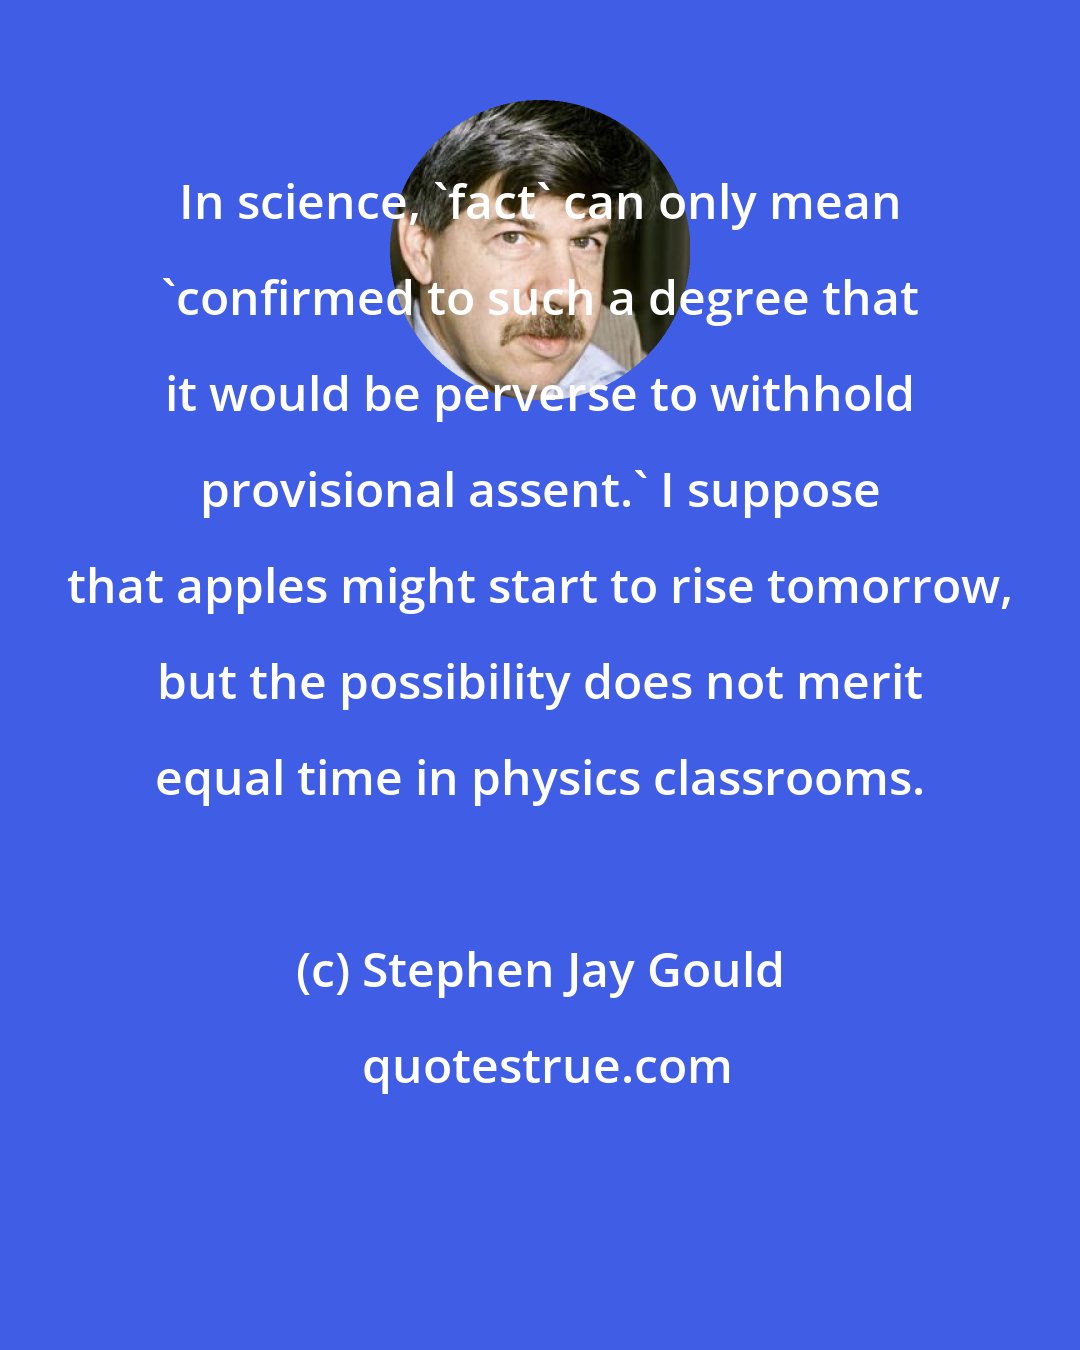 Stephen Jay Gould: In science, 'fact' can only mean 'confirmed to such a degree that it would be perverse to withhold provisional assent.' I suppose that apples might start to rise tomorrow, but the possibility does not merit equal time in physics classrooms.